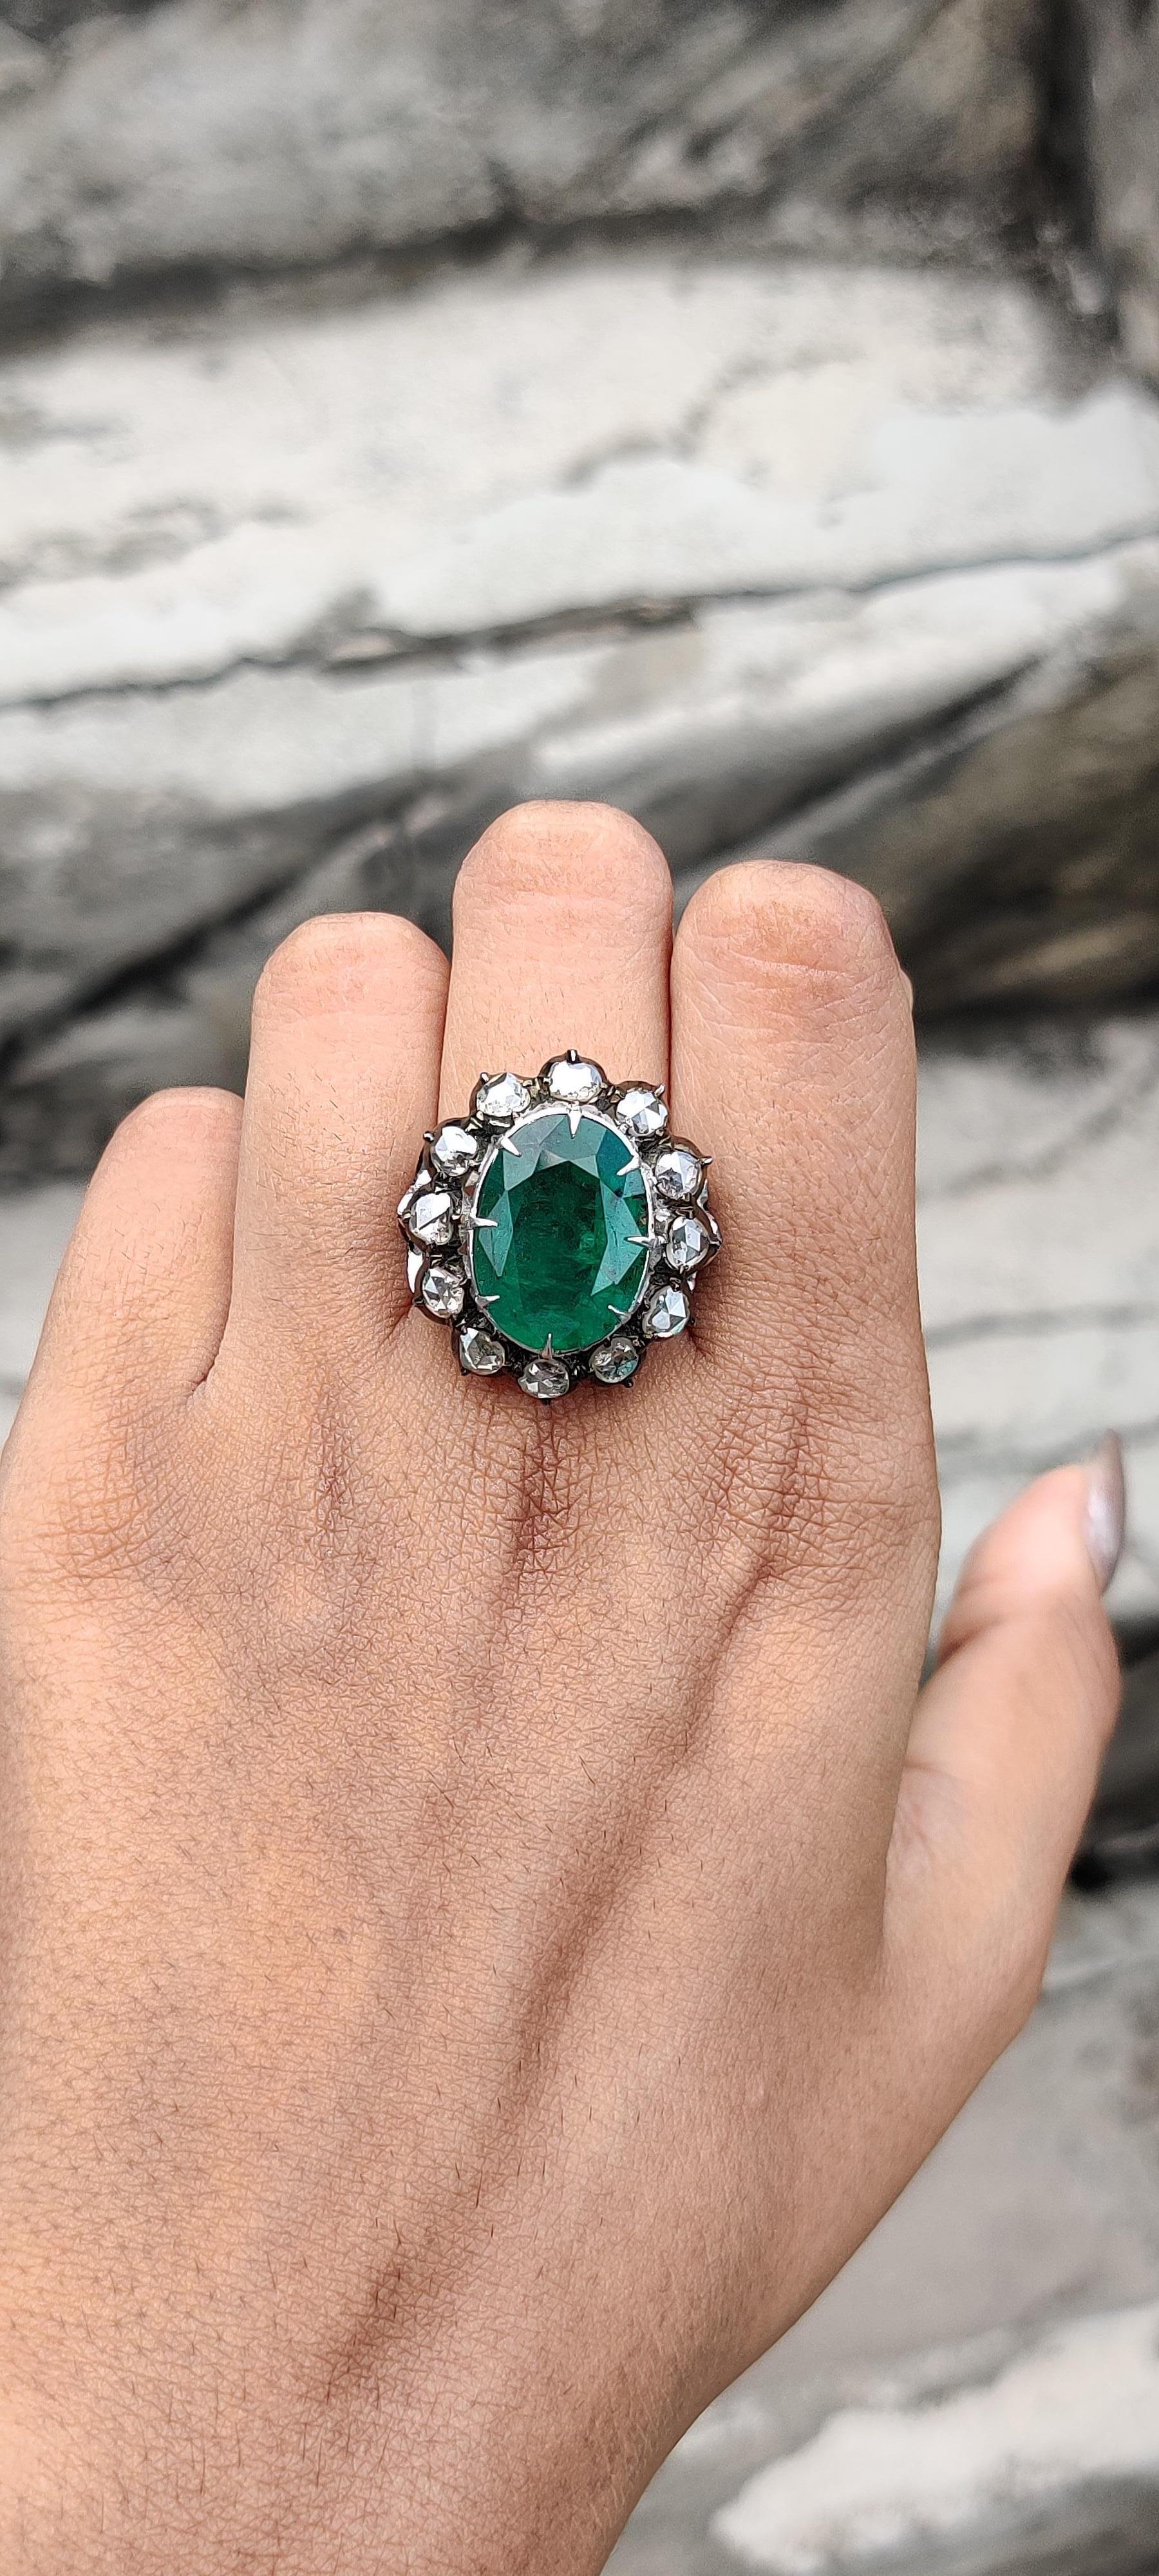  8.9 Ct Zambian Emerald Art Deco Ring with Rose Cut Diamonds in 14K White Gold For Sale 1